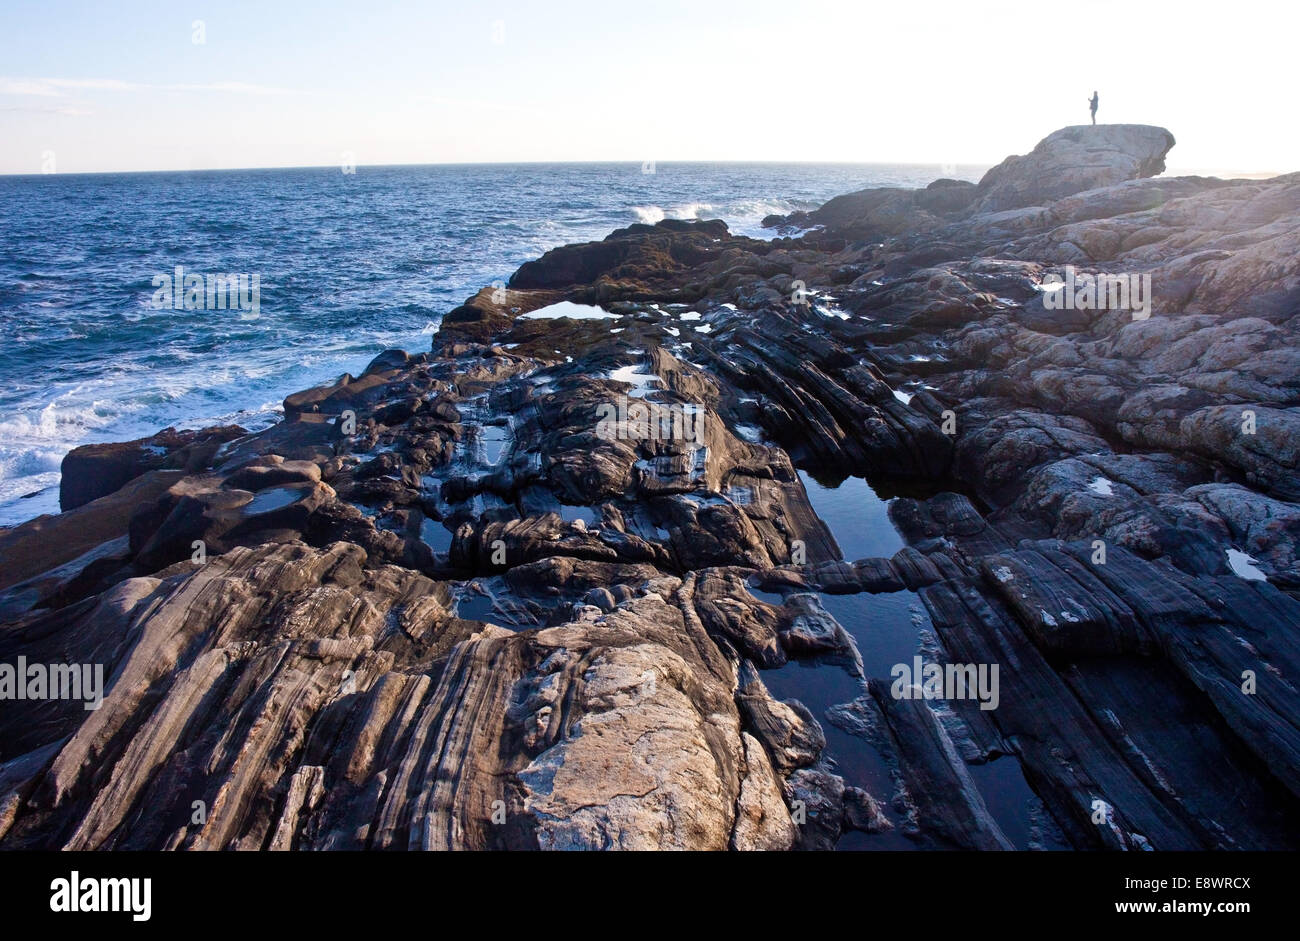 A lone person atop the rocky shoreline near the Pemaquid Point Light in Maine Stock Photo